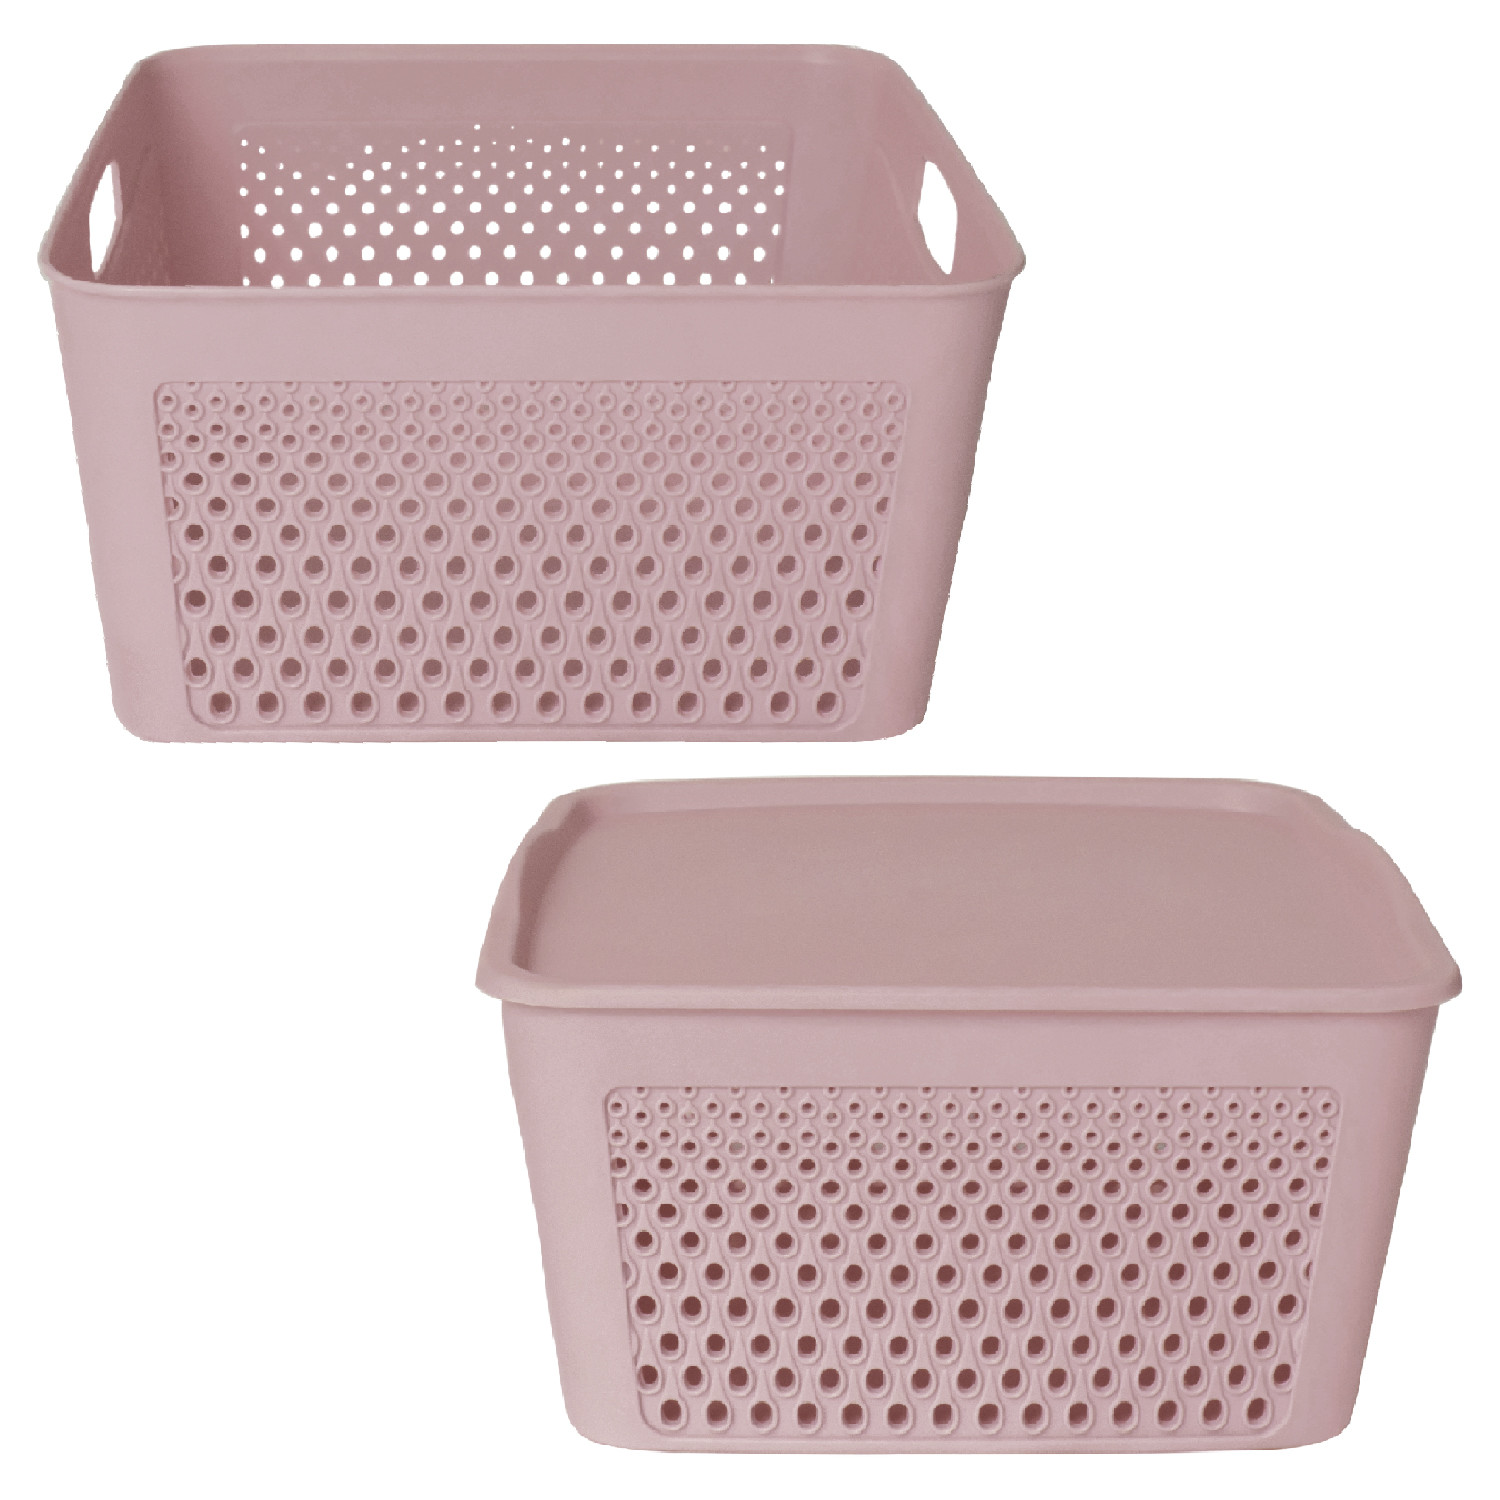 Kuber Industries Netted Design Unbreakable Multipurpose Square Shape Plastic Storage Baskets with lid Small, Medium, Large Pack of 3 (Grey)